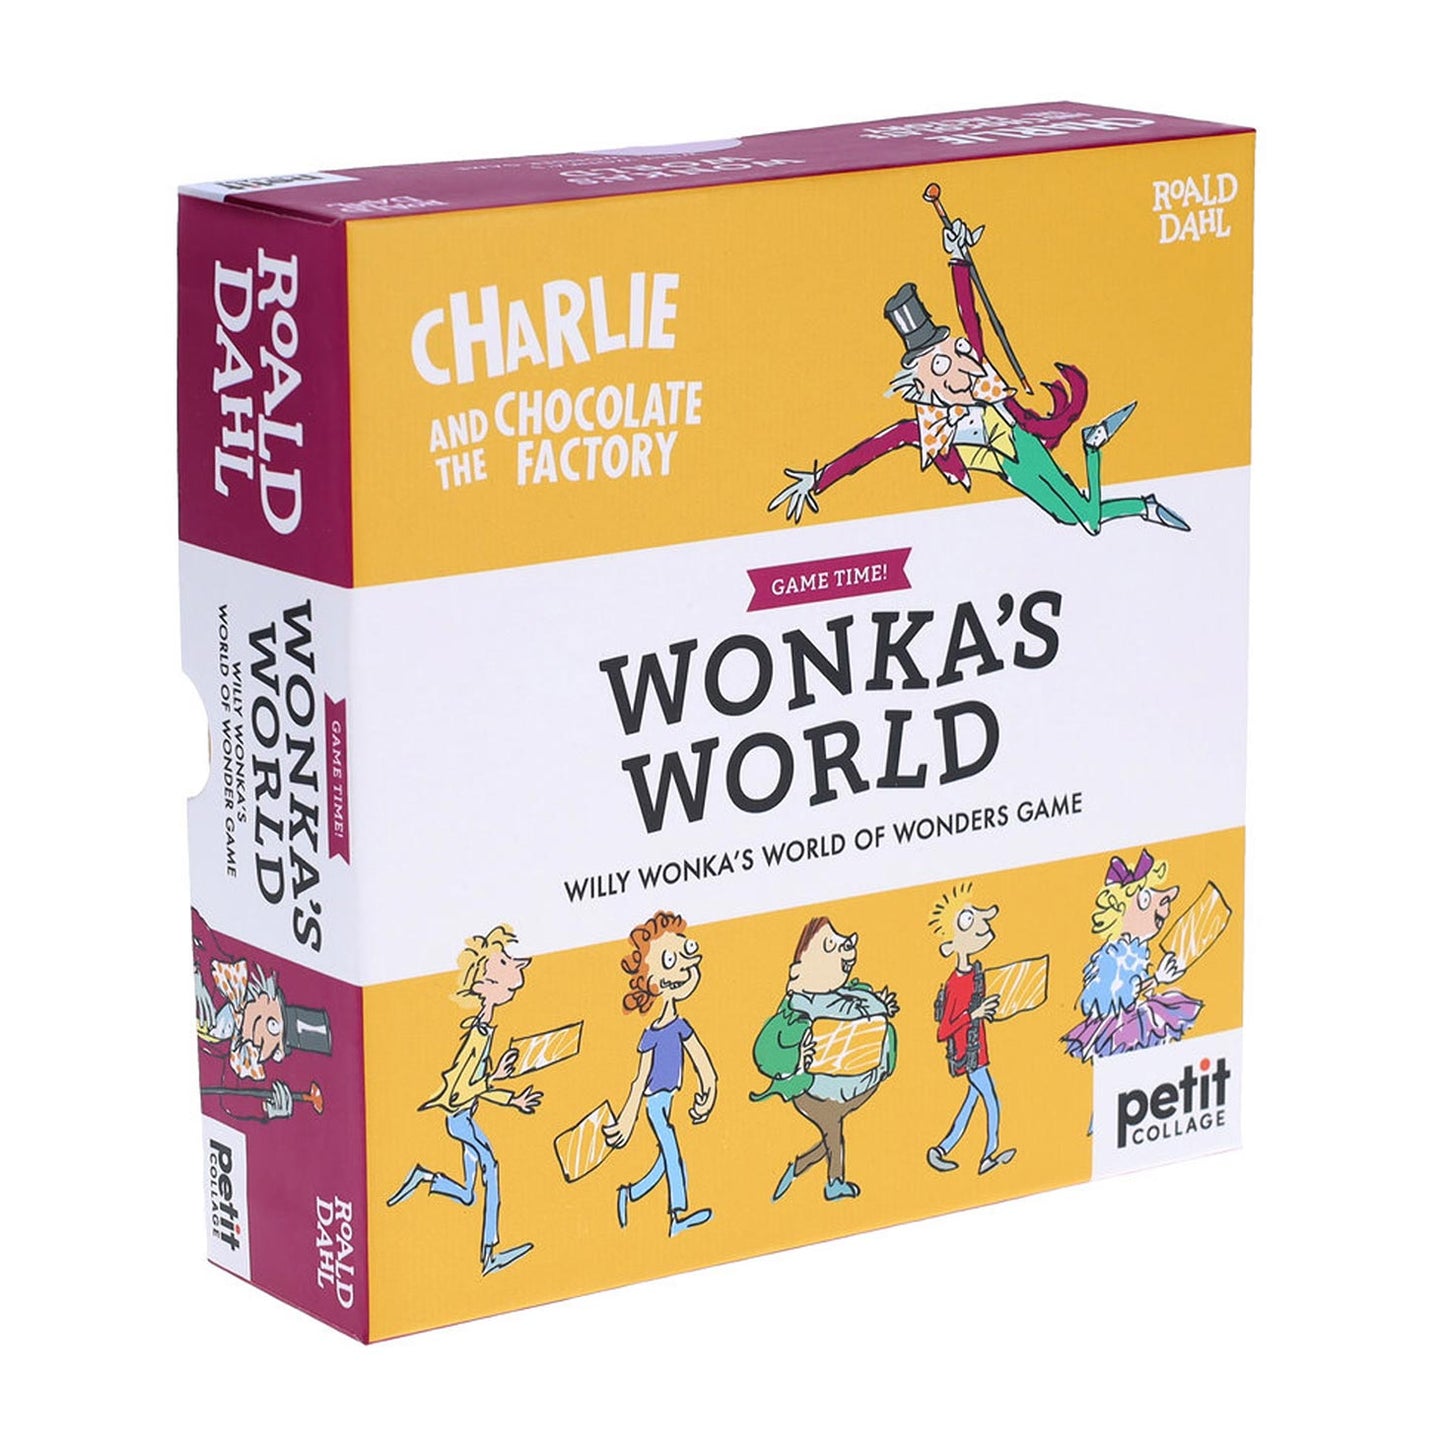 Wonka's World, a game based on Roald Dahl stories and with Quentin Blake illustrations